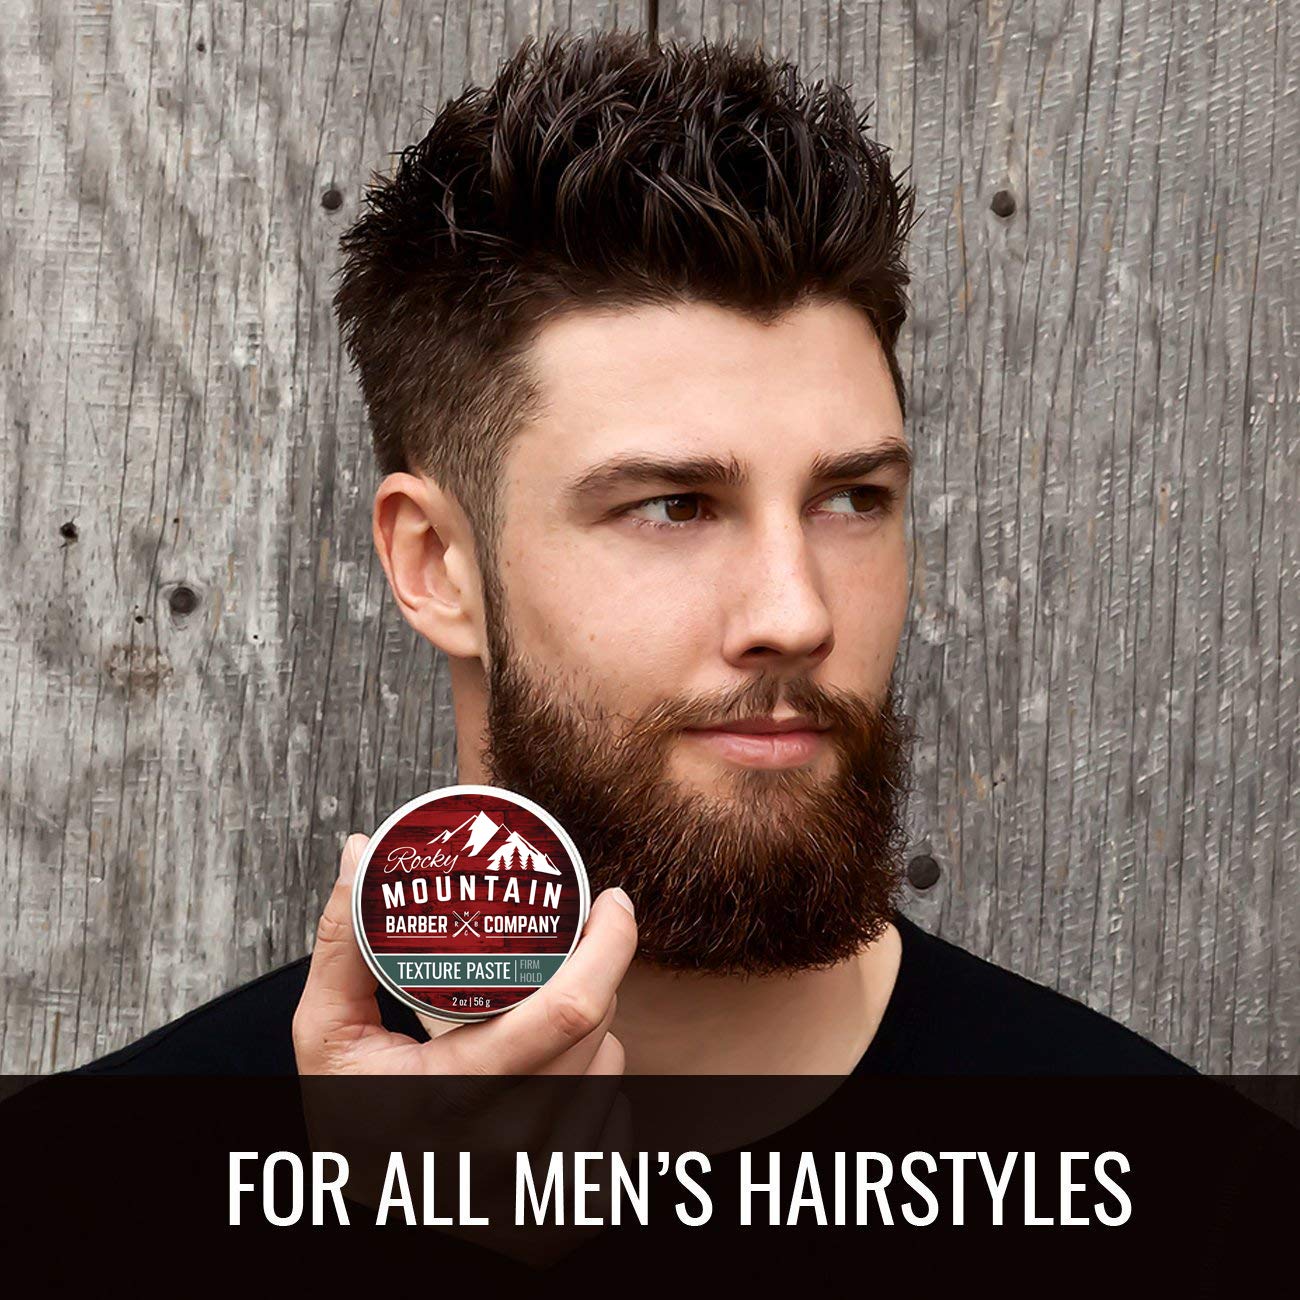 Mua Hair Paste for Men - Hair Styling Paste with Pliable Light-Firm Hold  for All Hair Styles, Shine-Free Matte Finish - Easy to Wash Out – 2oz by  Rocky Mountain Barber Company